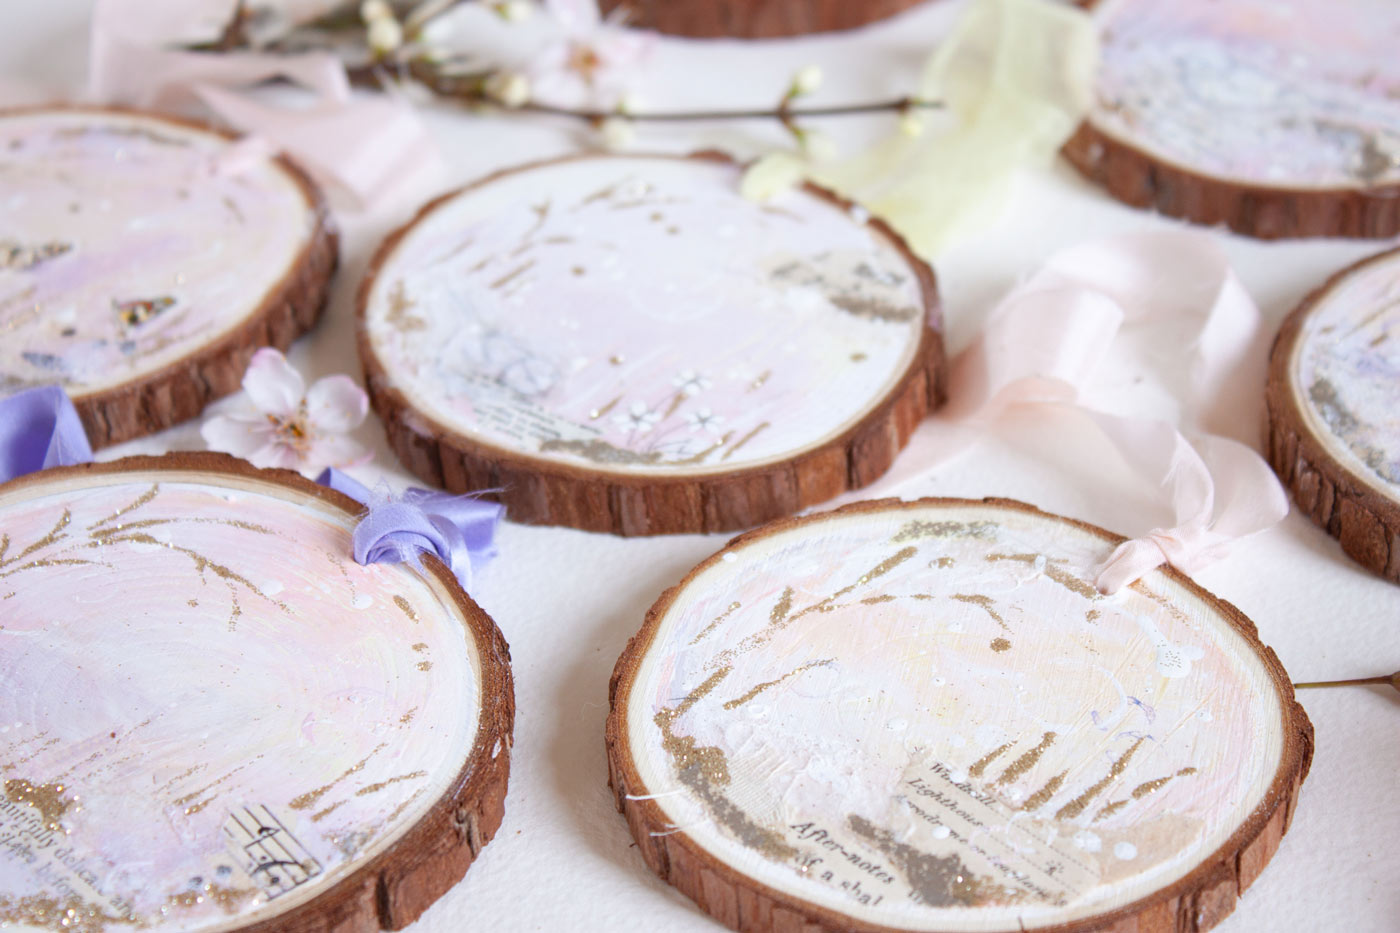 Light Passage Dreamscape Hanging Mini Painting on Rustic Wooden Slice